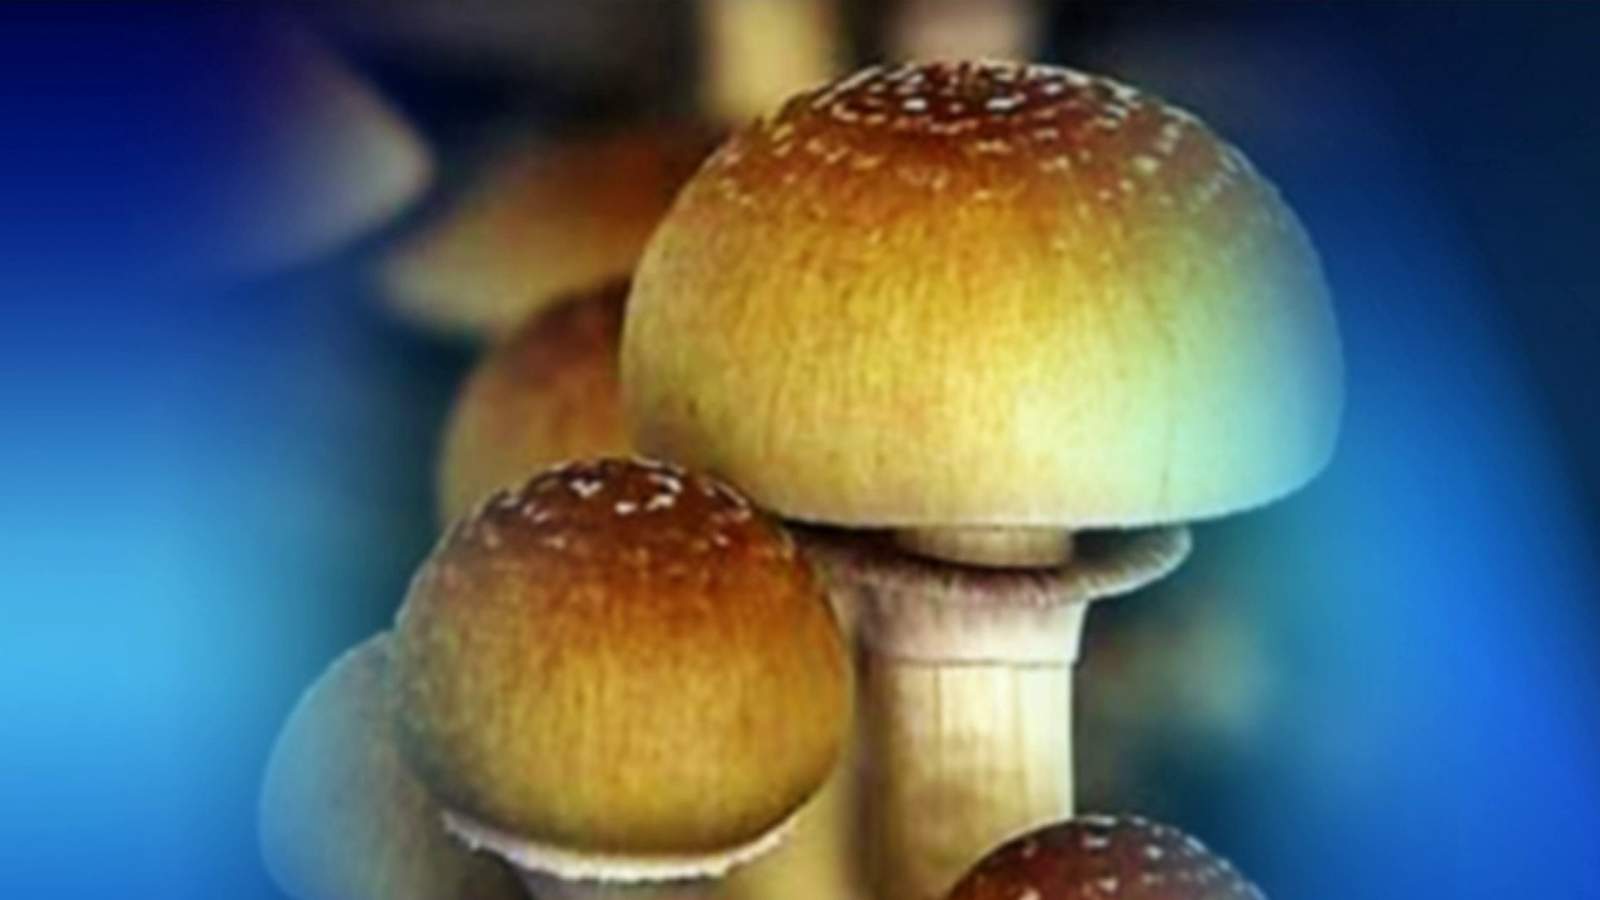 Magic mushrooms effective in treating depression, study finds